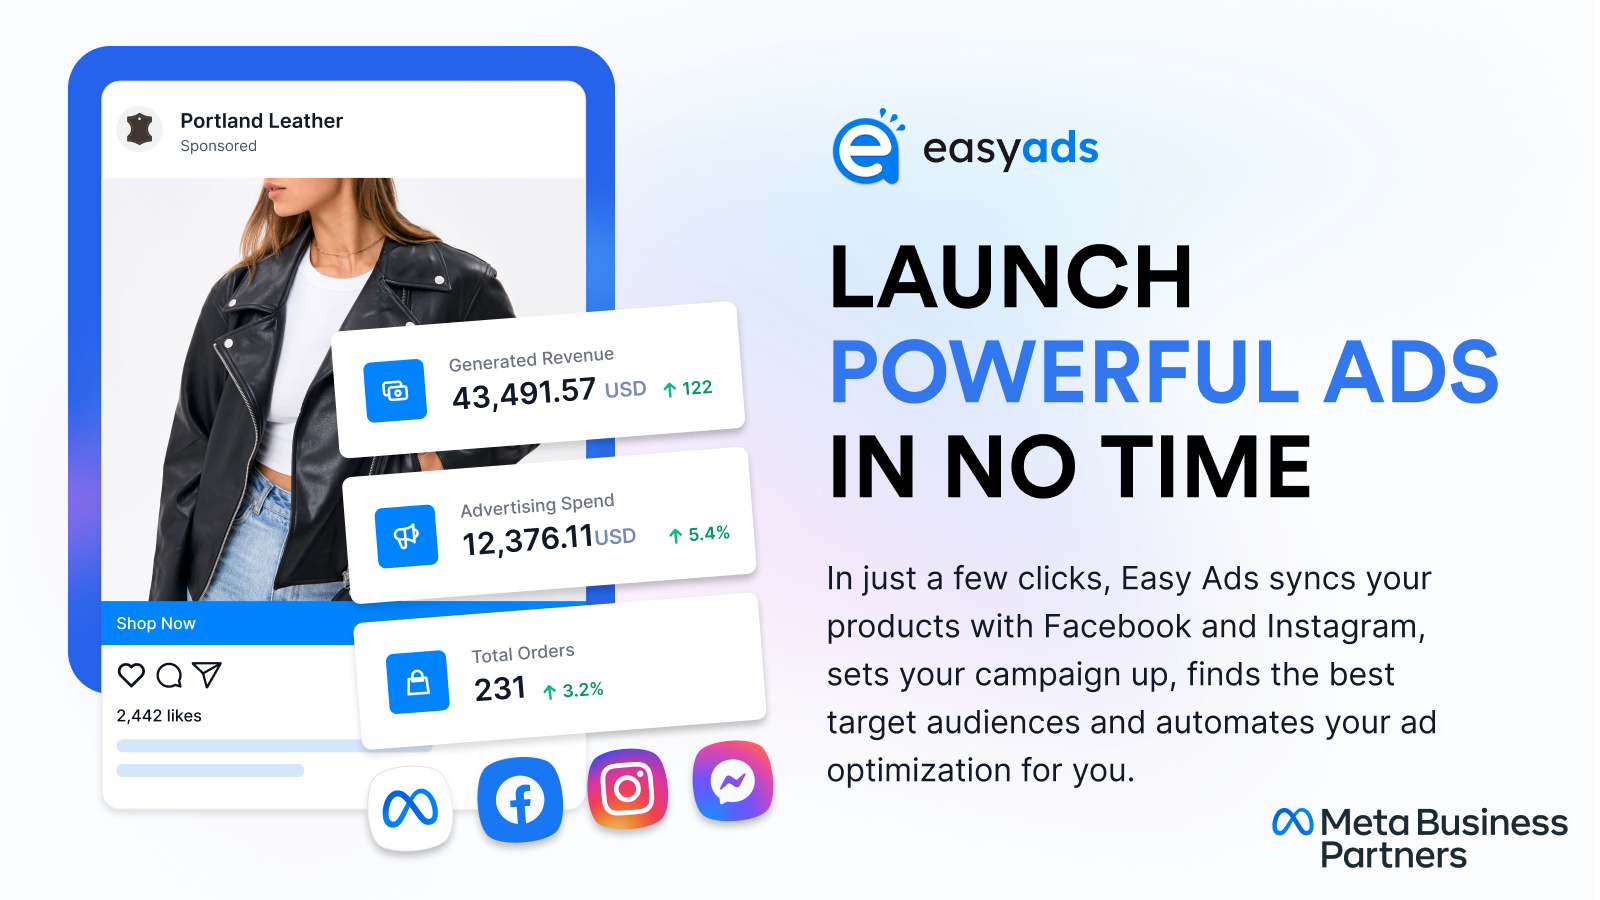 In just a few clicks, Easy Ads sets up your ads for success!